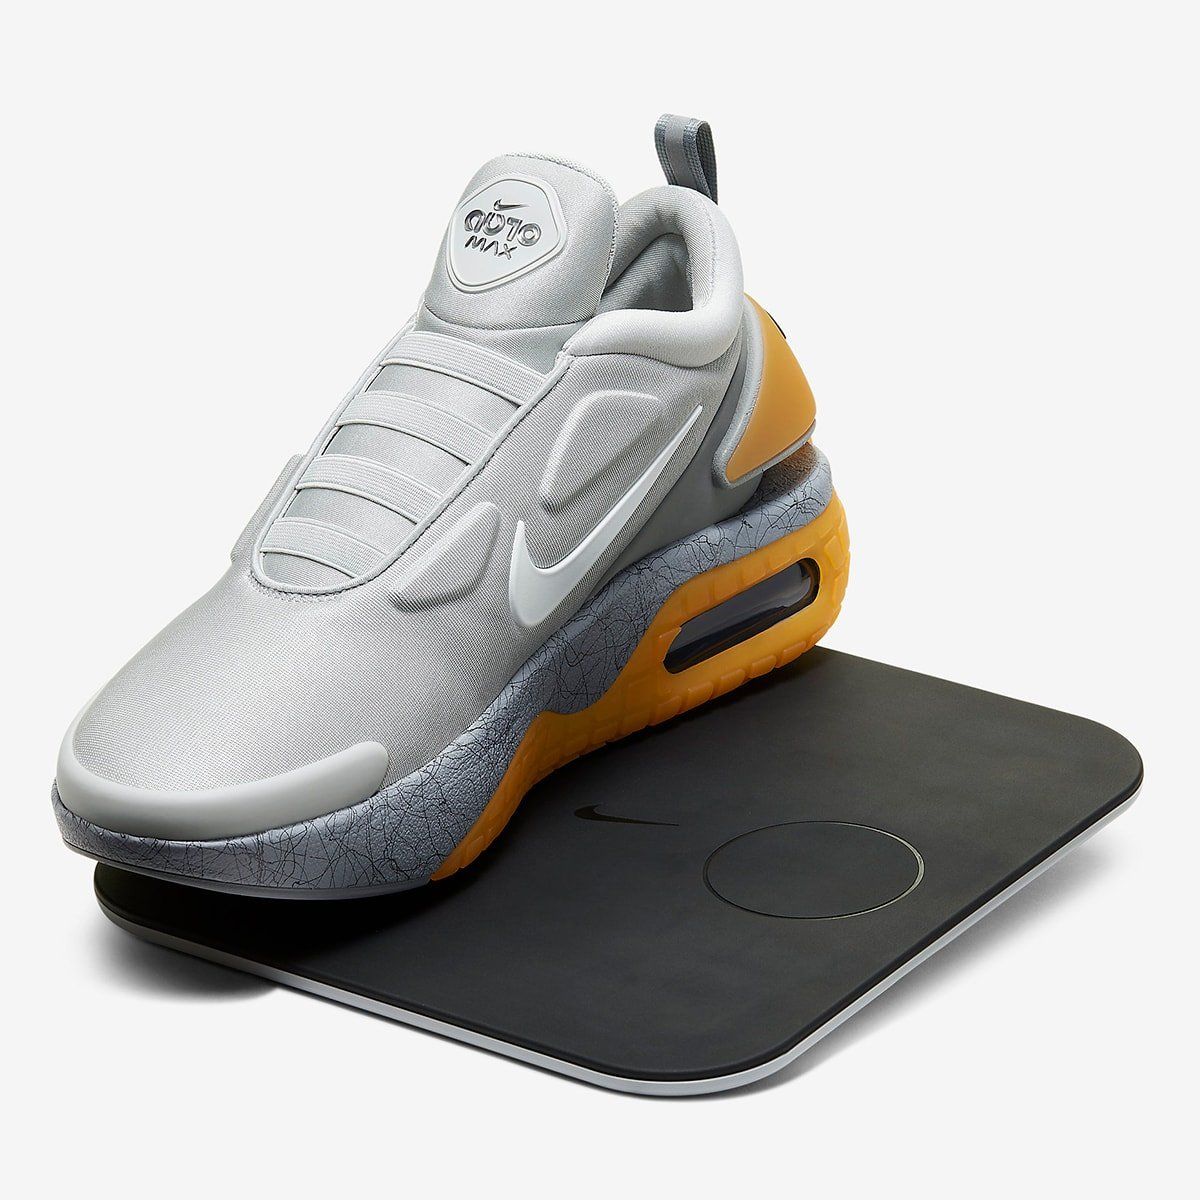 The Nike Adapt Auto Max Just Dropped in Asia | HOUSE OF HEAT